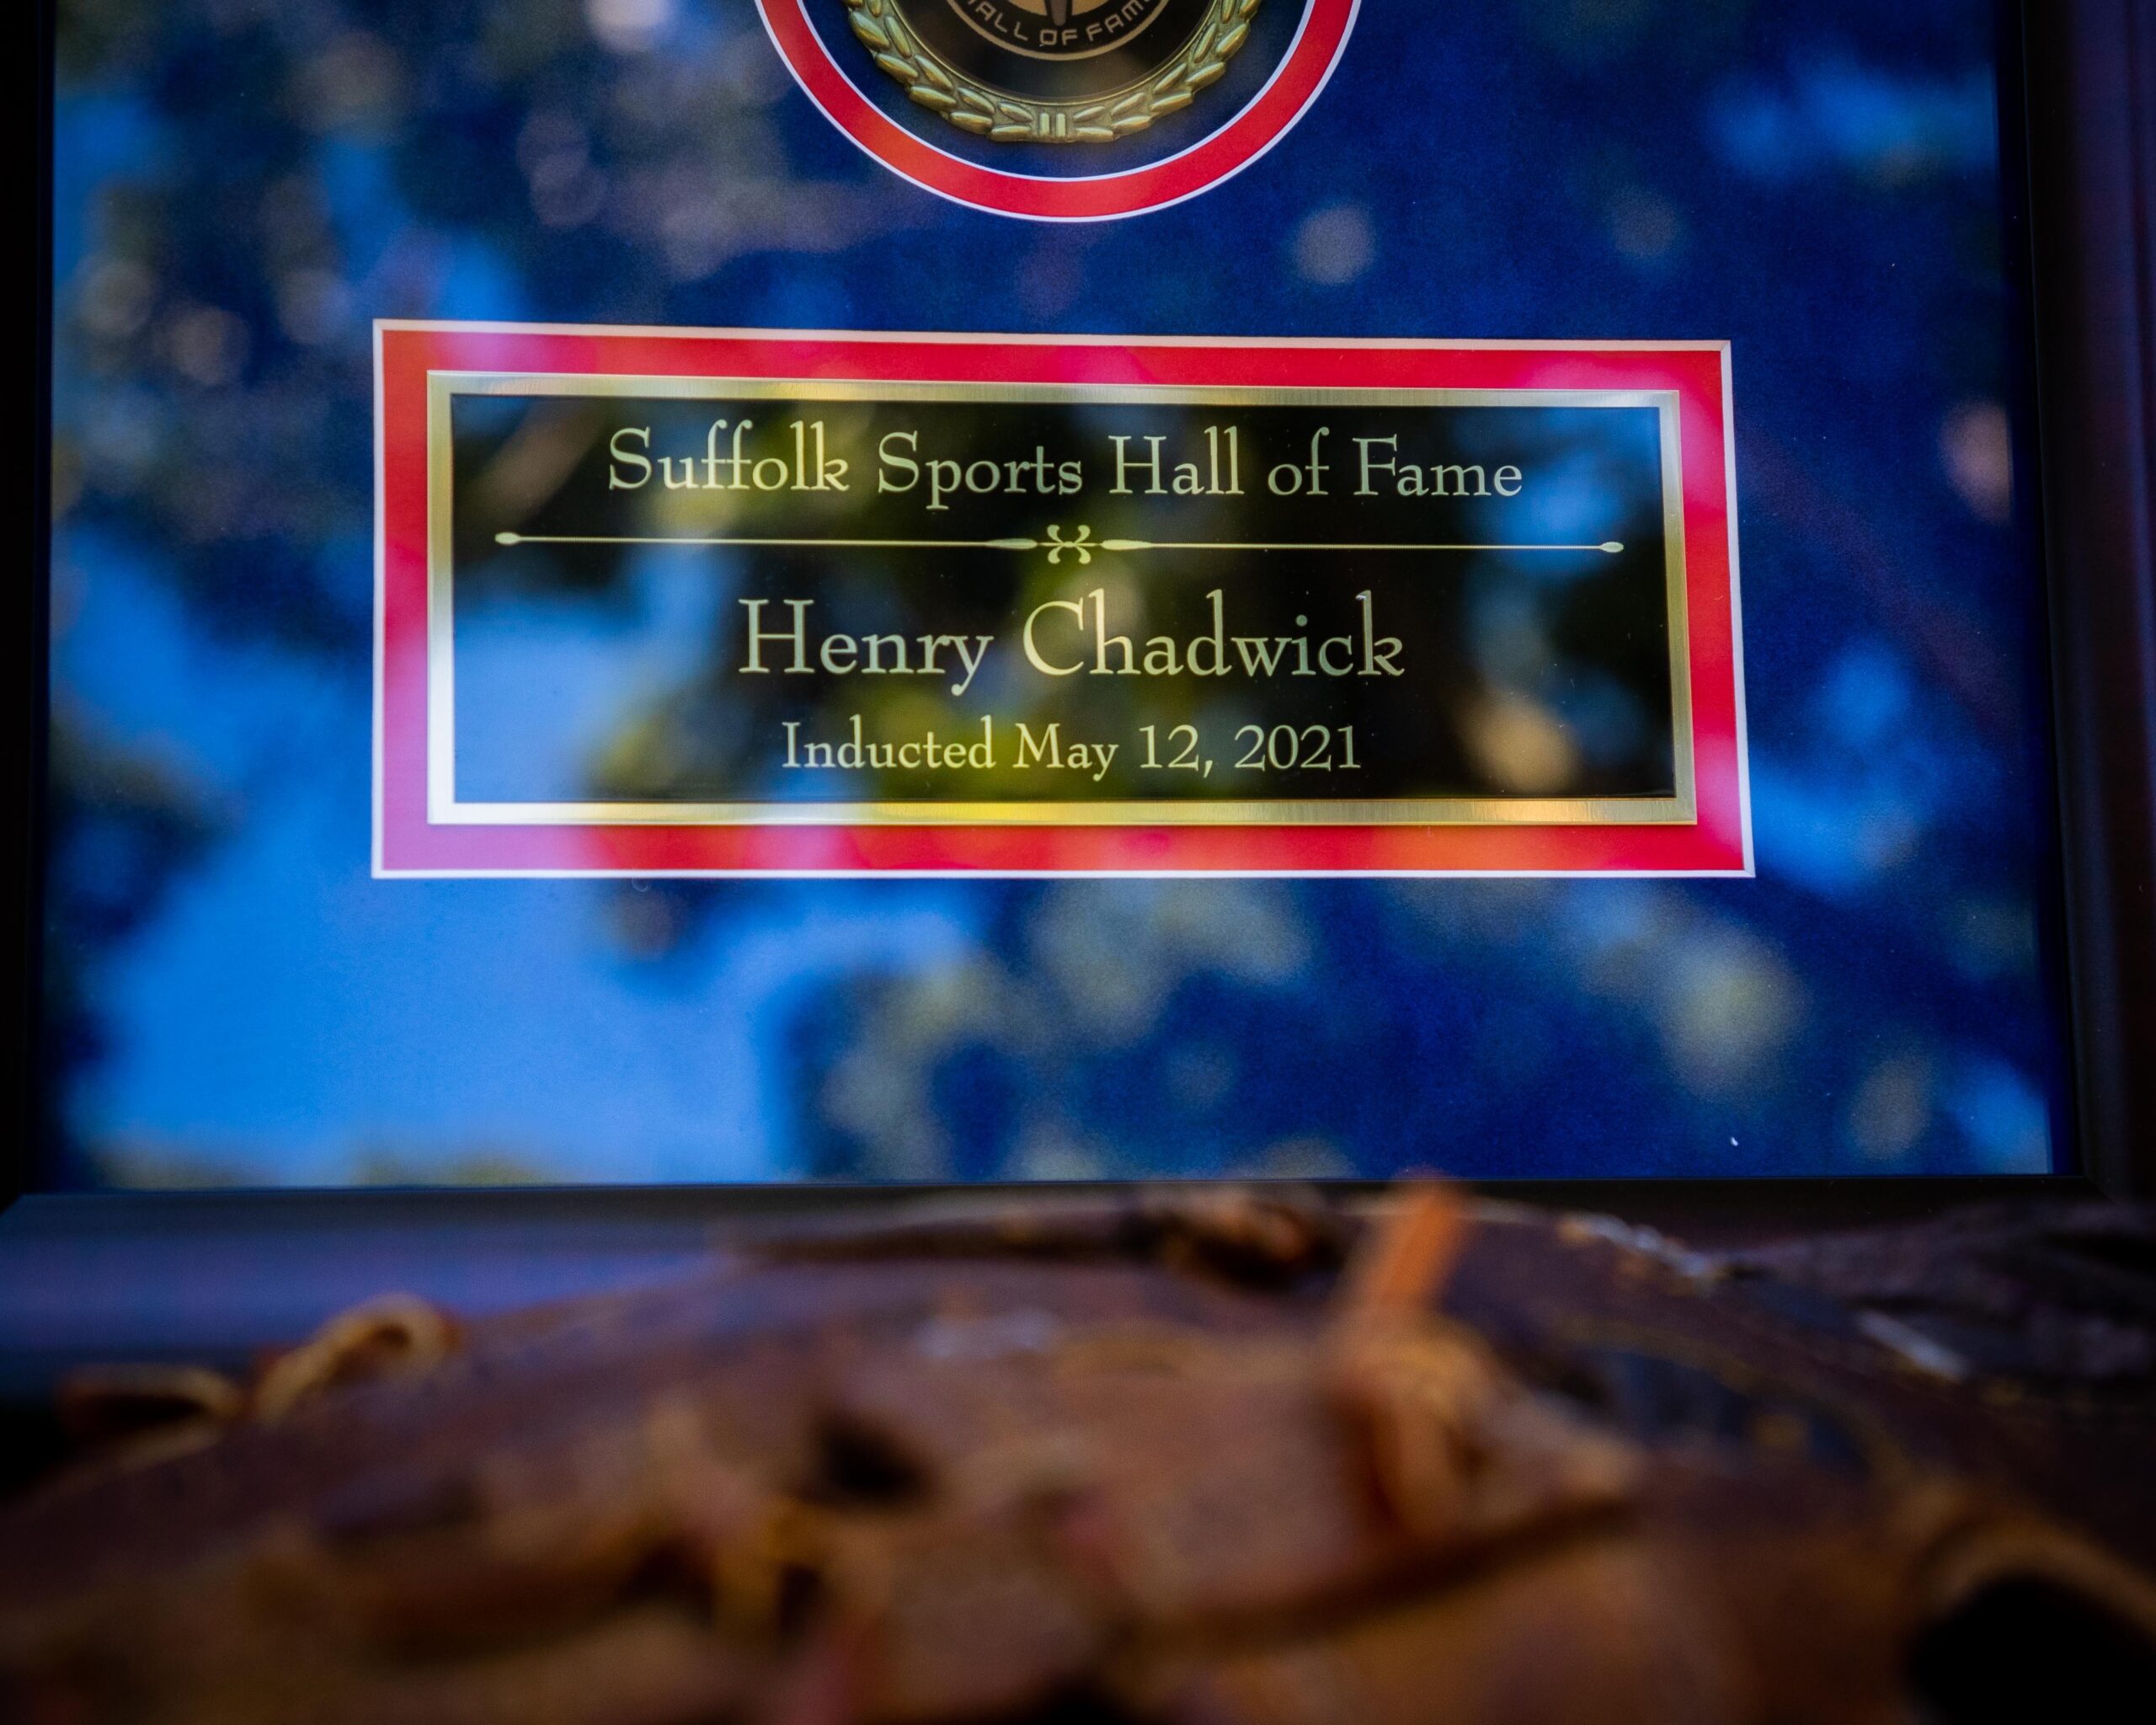 Henry Chadwick's medal from when he was inducted into the Suffolk Sports Hall of Fame.   DEMETRIUS KAZANAS